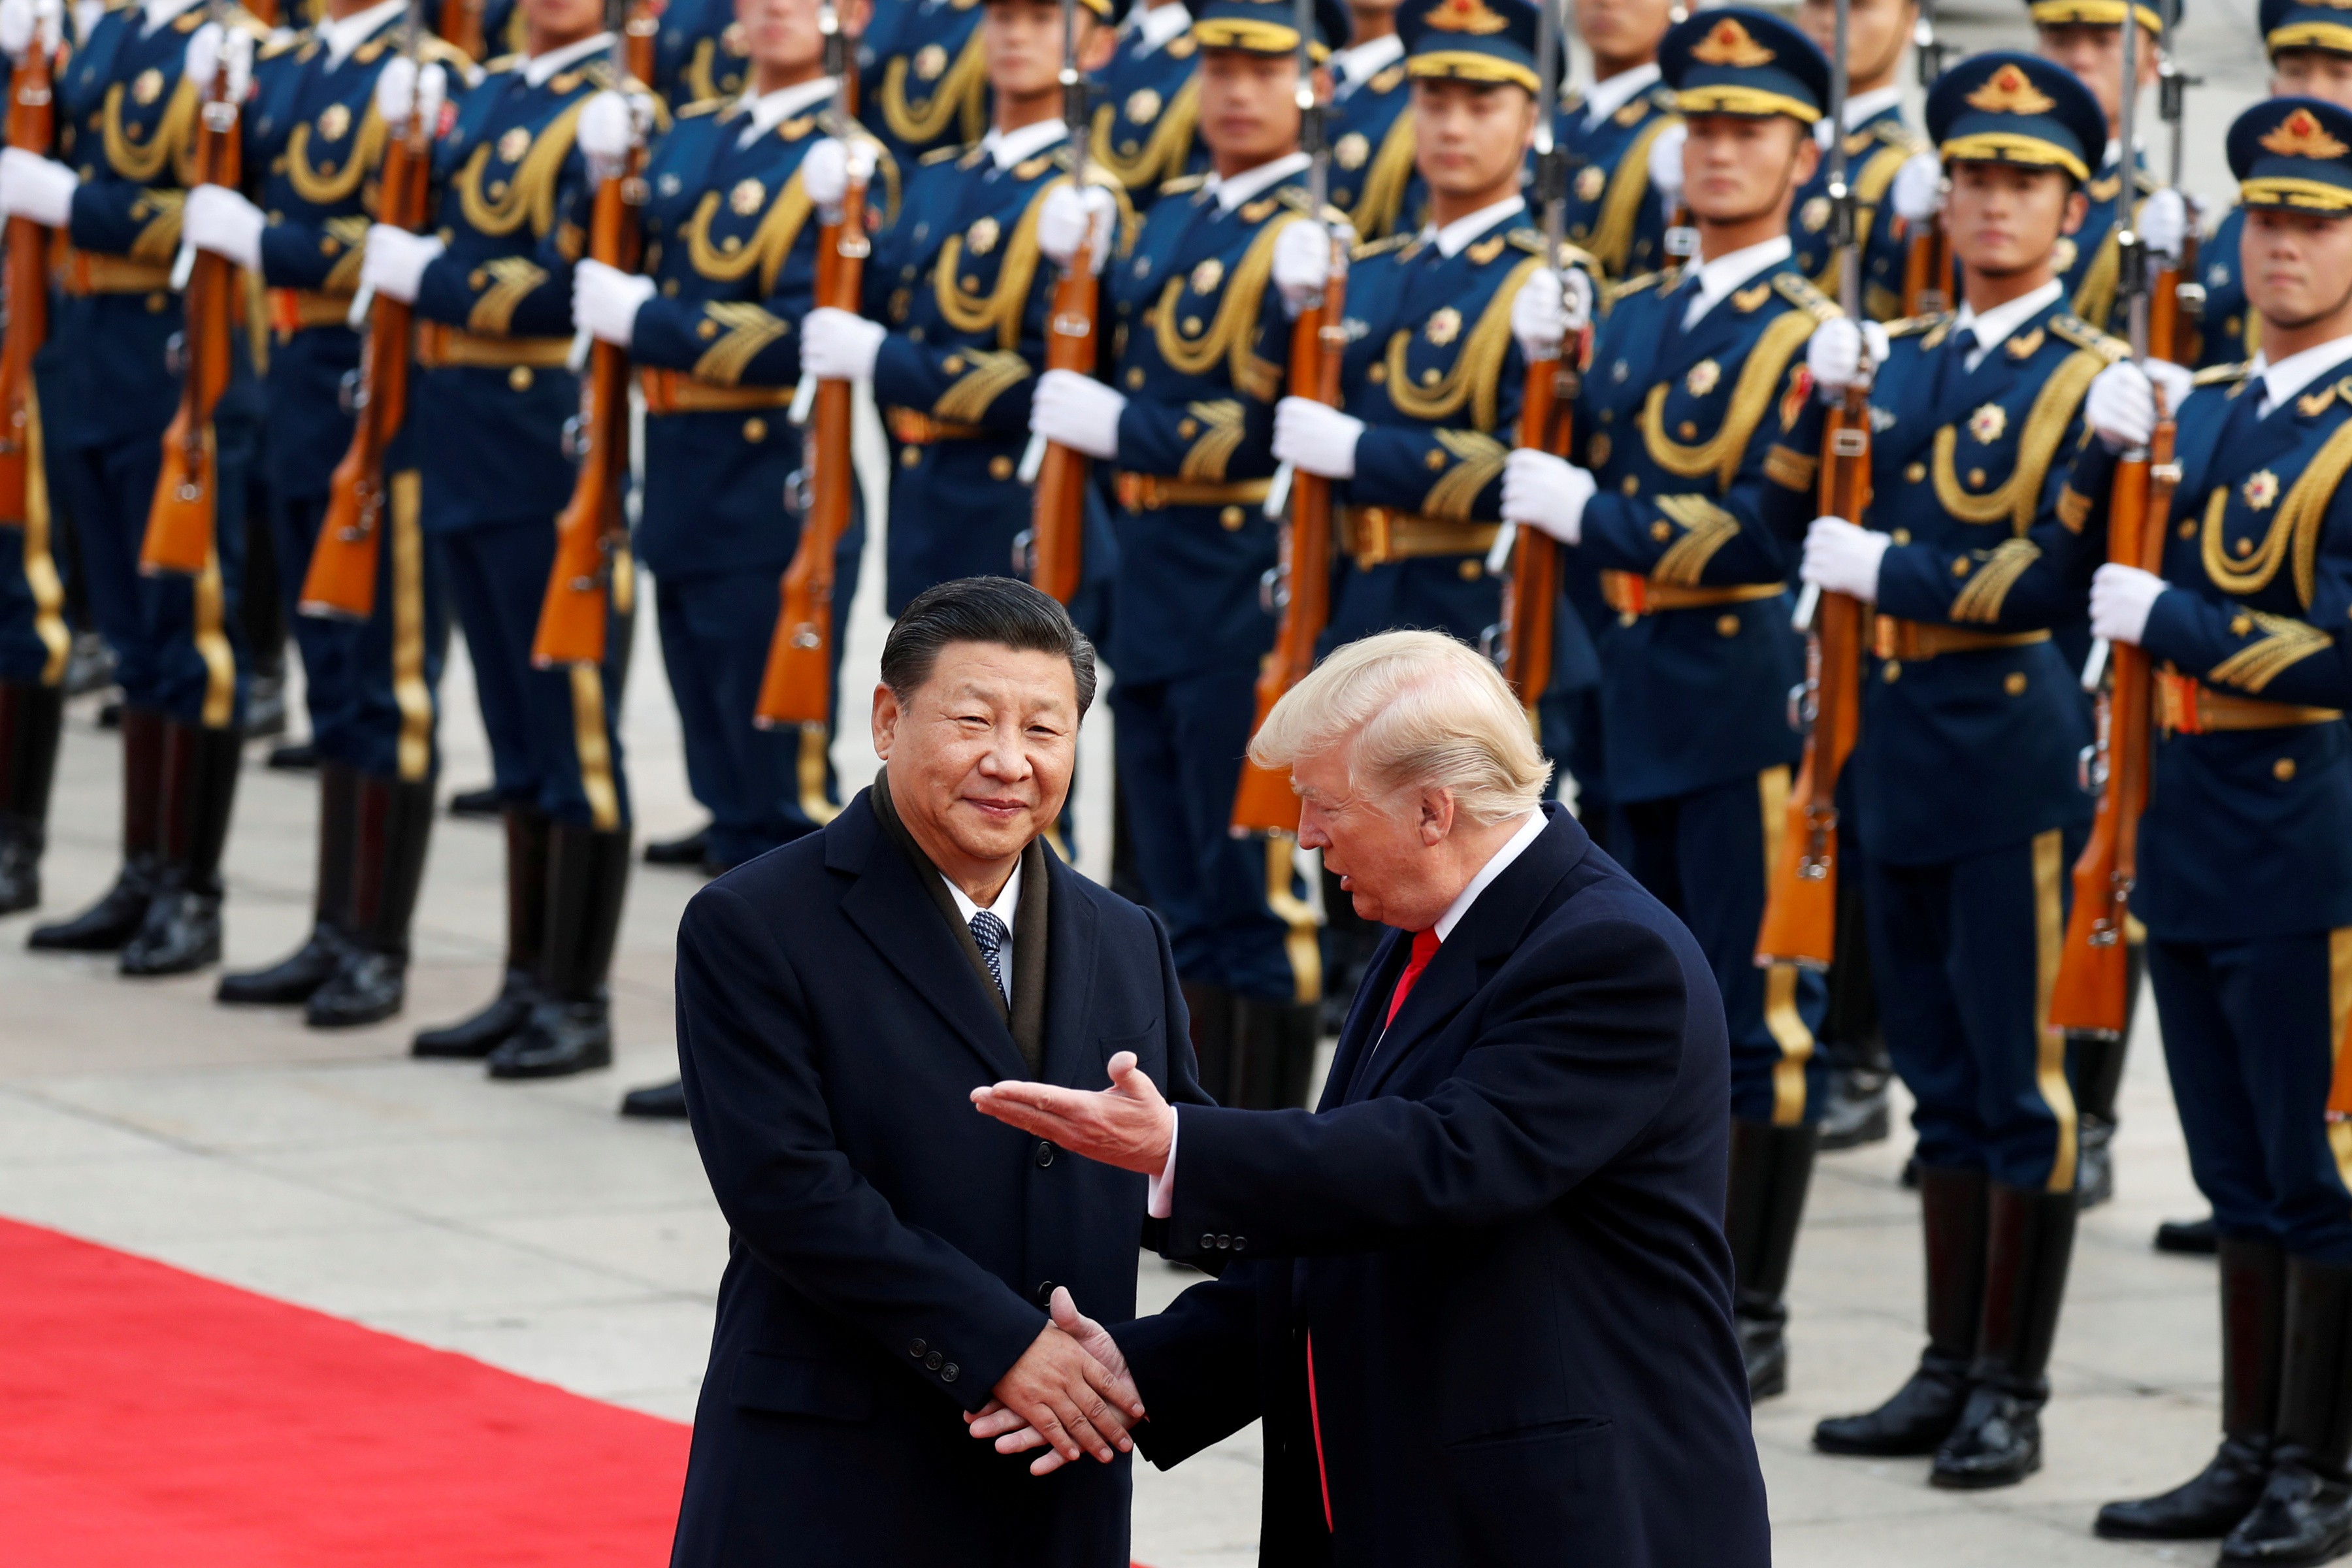 A negotiated resolution to the US-China trade war may happen when Presidents Xi Jinping and Donald Trump meet at the end of June. Photo: Reuters